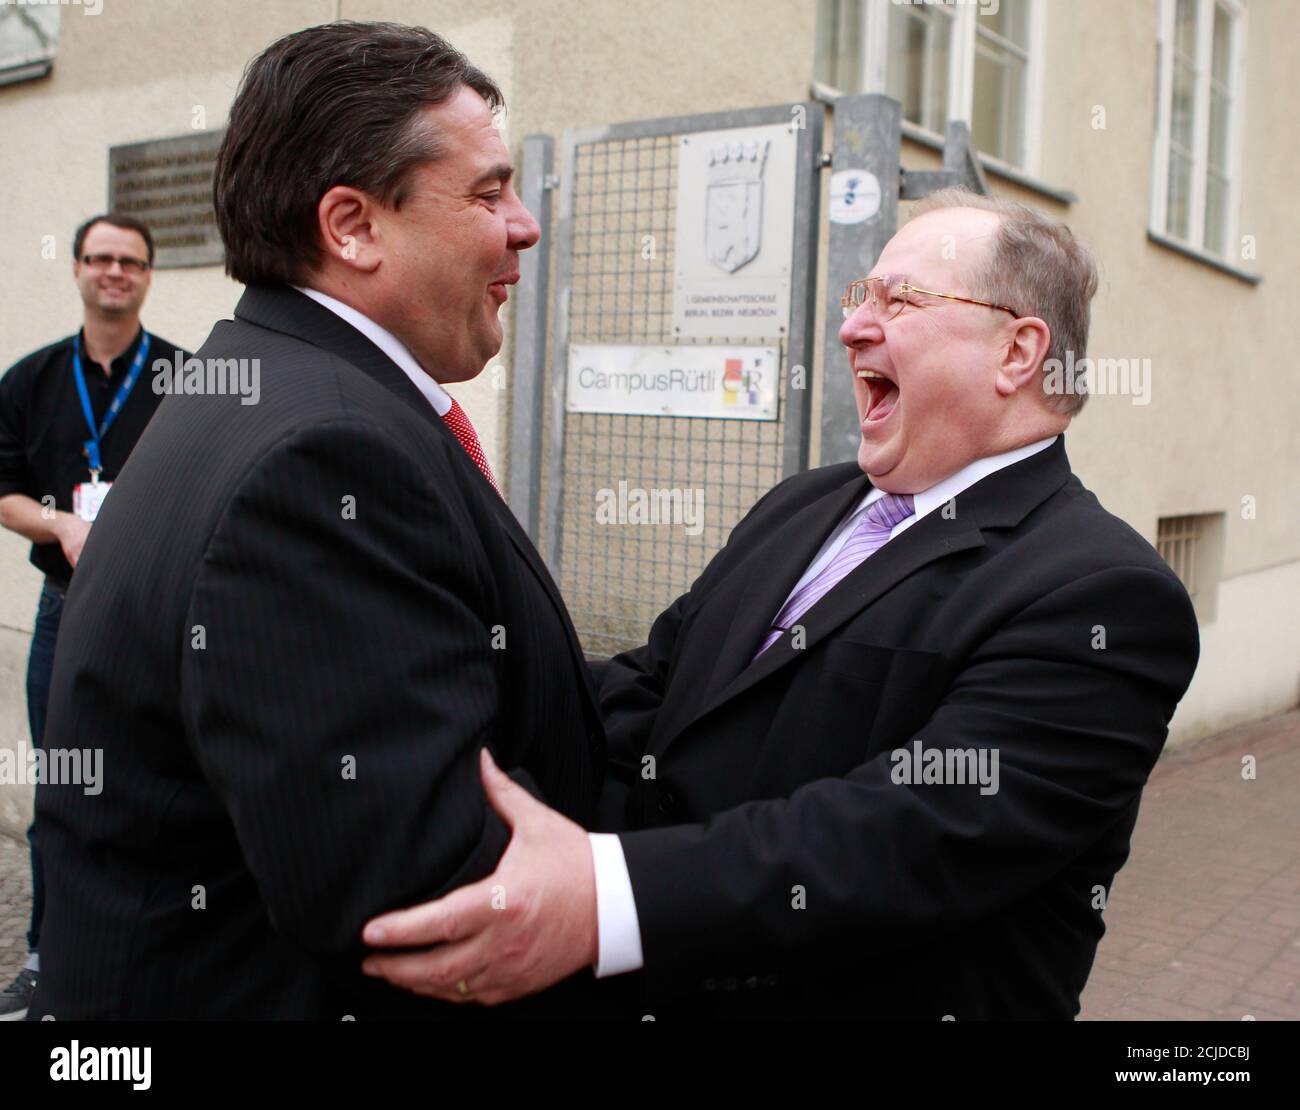 The district mayor of Berlin's Neukoelln borough and member of the Social Democratic Party (SPD) Heinz Buschkowsky (R) welcomes SPD leader Sigmar Gabriel to a local SPD meeting at the Ruetli School in Berlin, April 11, 2011.  The multi-ethnic district of Neukoelln is considered one of the poorest of the German capital, where voters will elect a new mayor later this year.   REUTERS/Thomas Peter (GERMANY - Tags: POLITICS) Stock Photo